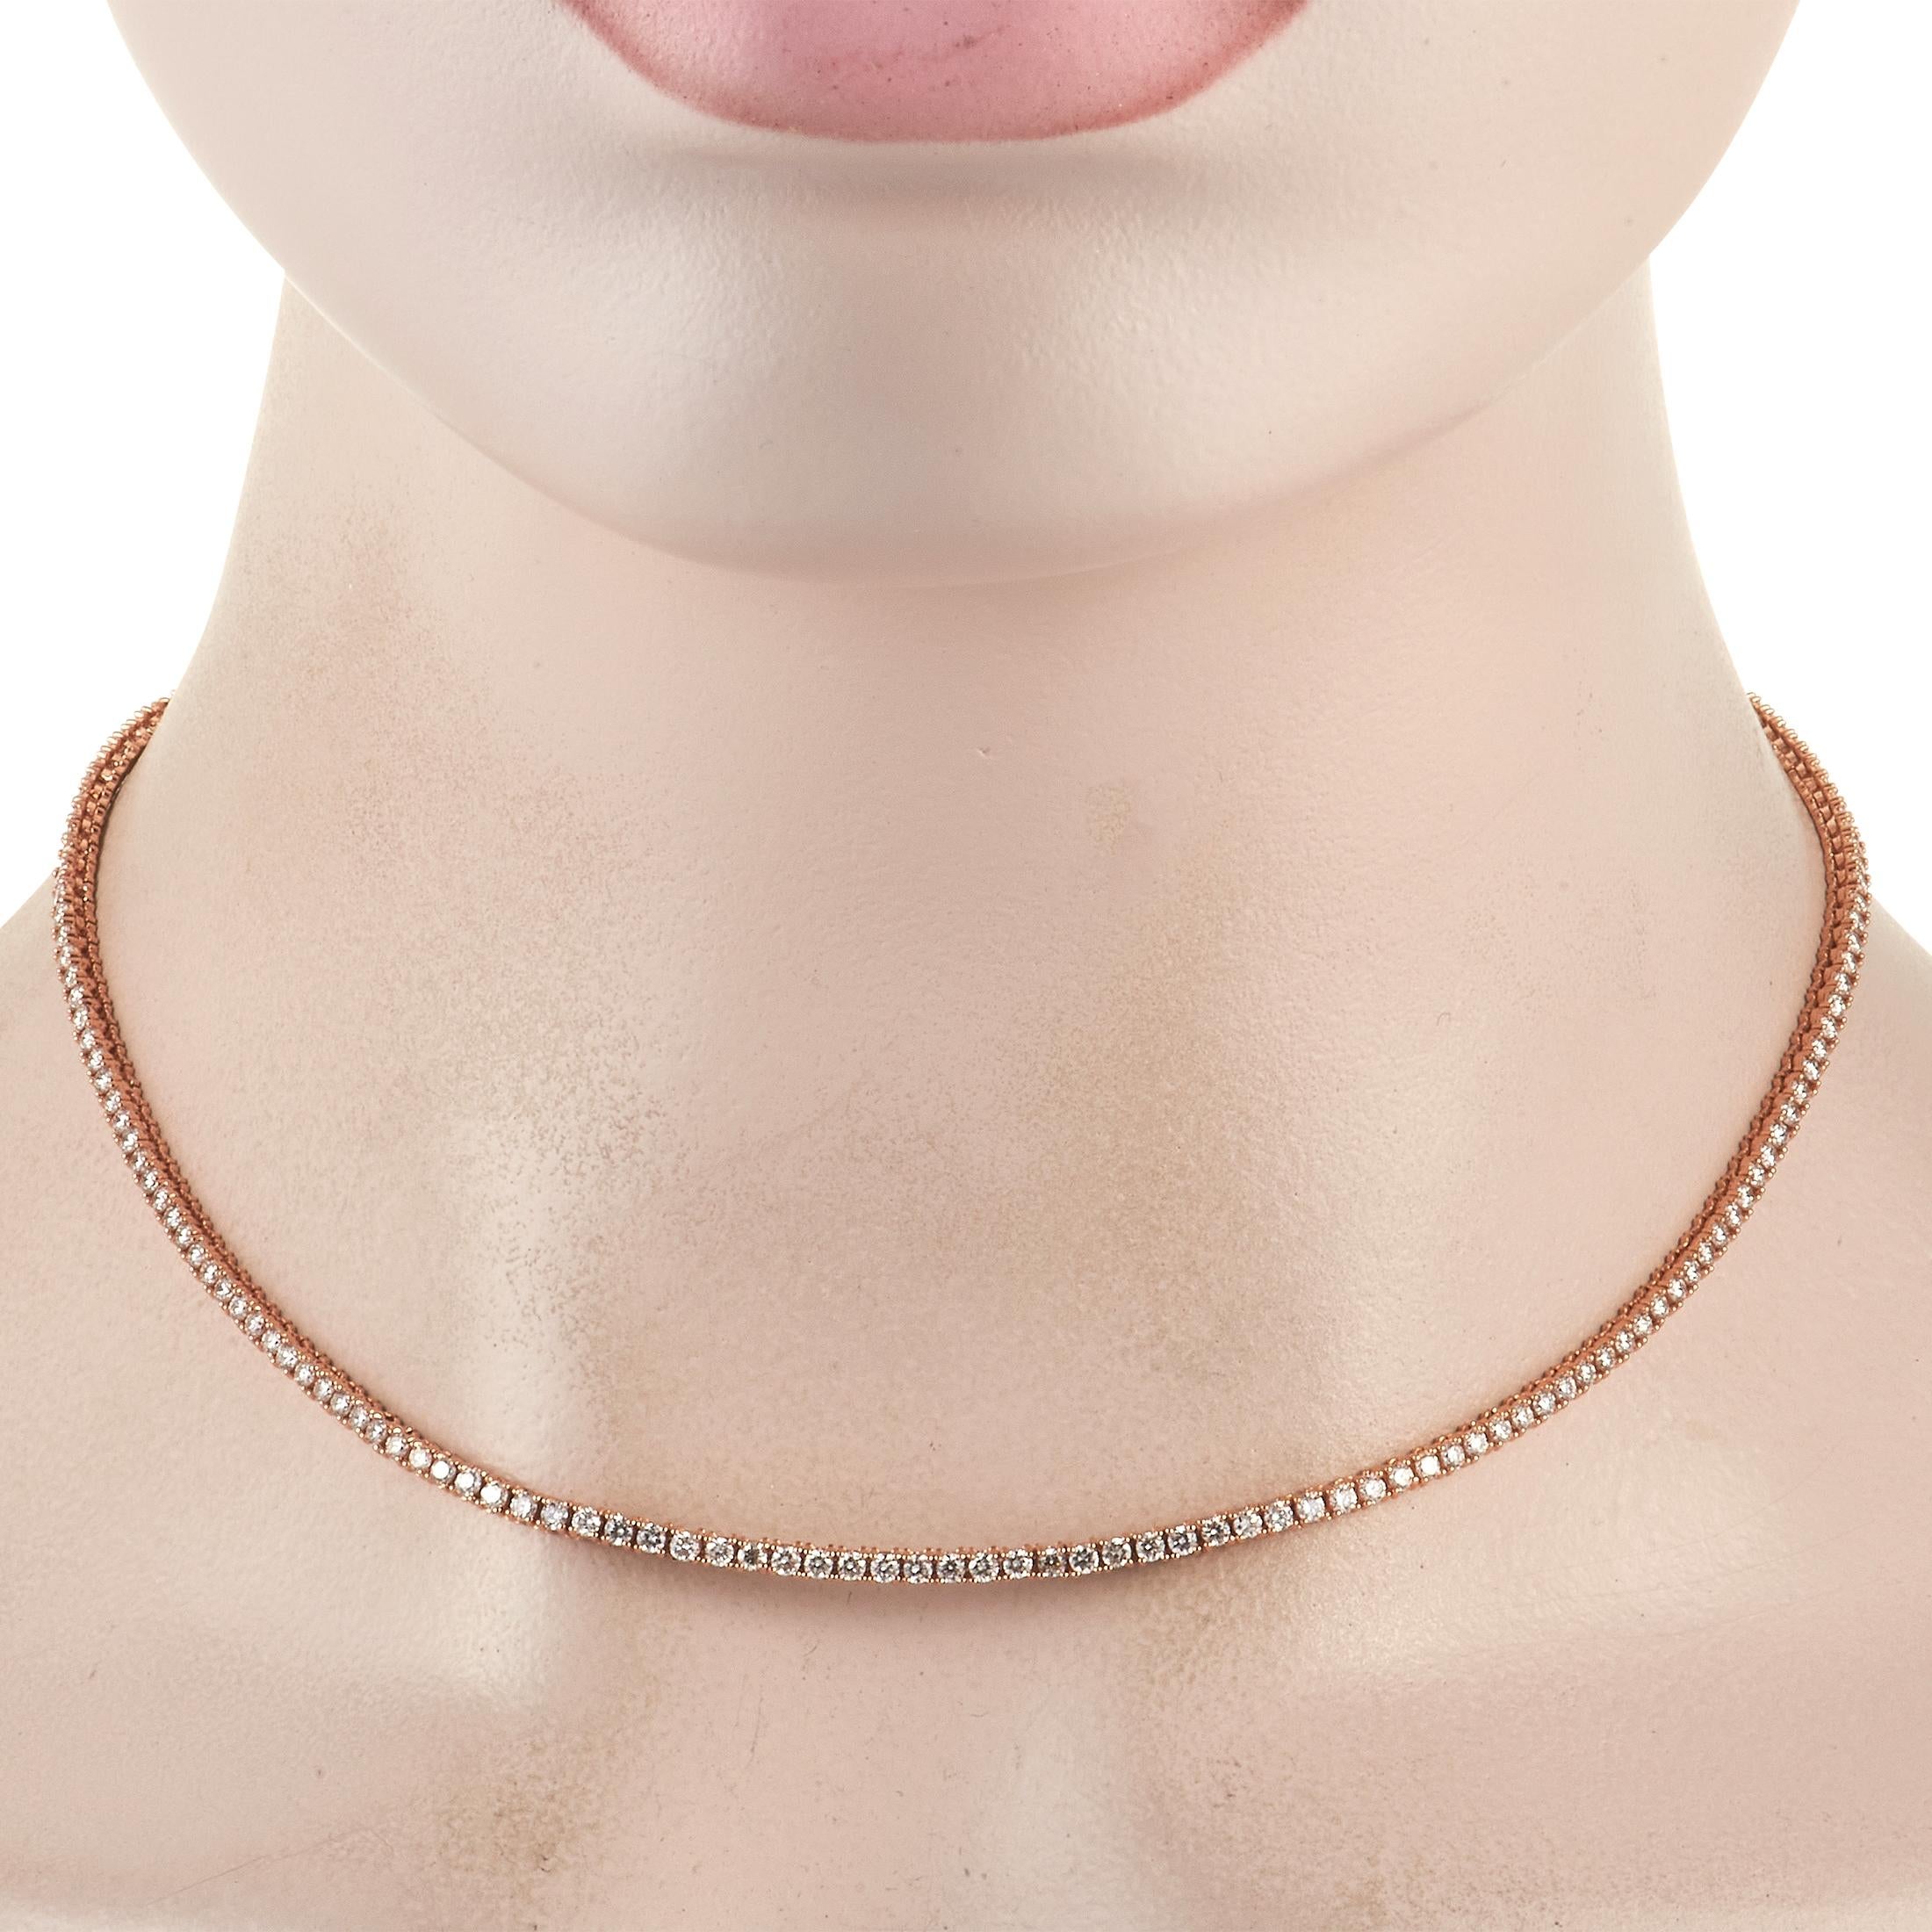 A series of sparkling diamonds with a total weight of 5.48 carats make this necklace simply unforgettable. Elegant and understated all at once, it’s crafted from opulent 18K Rose Gold and measures 16.5” long. 
 
 This jewelry piece is offered in